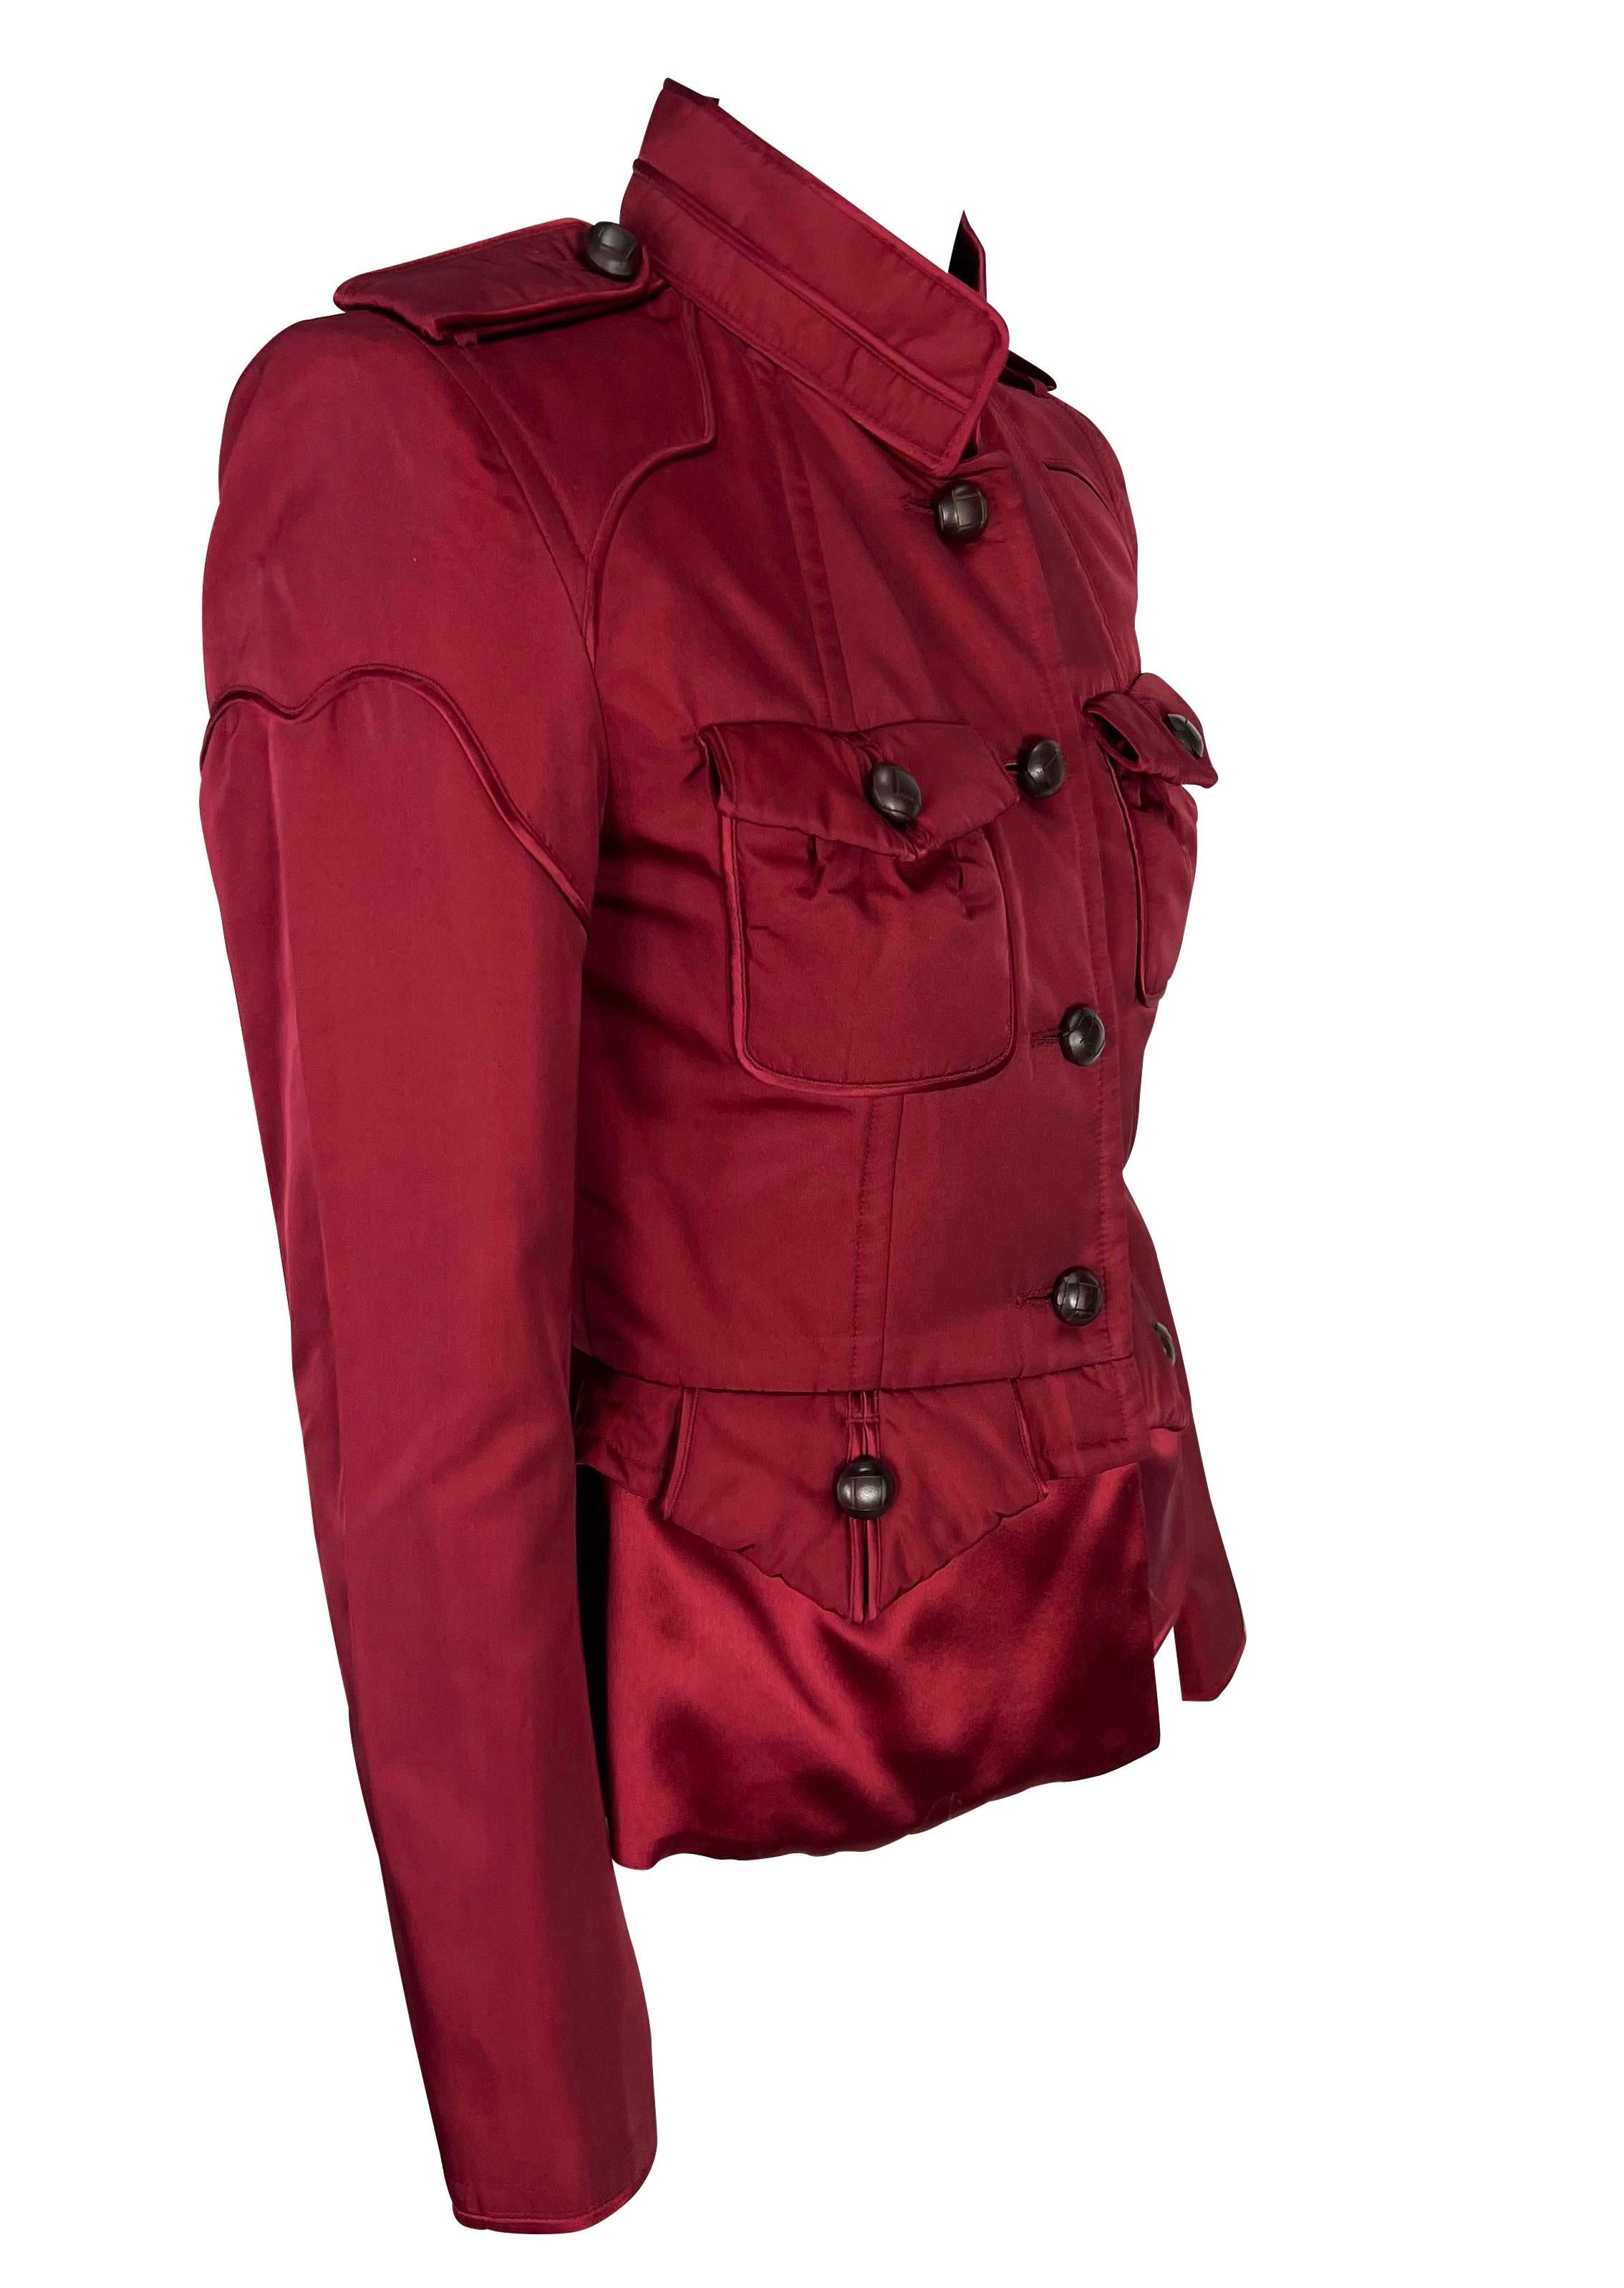 F/W 2004 Yves Saint Laurent by Tom Ford Runway Red Silk Satin Cropped Jacket For Sale 6